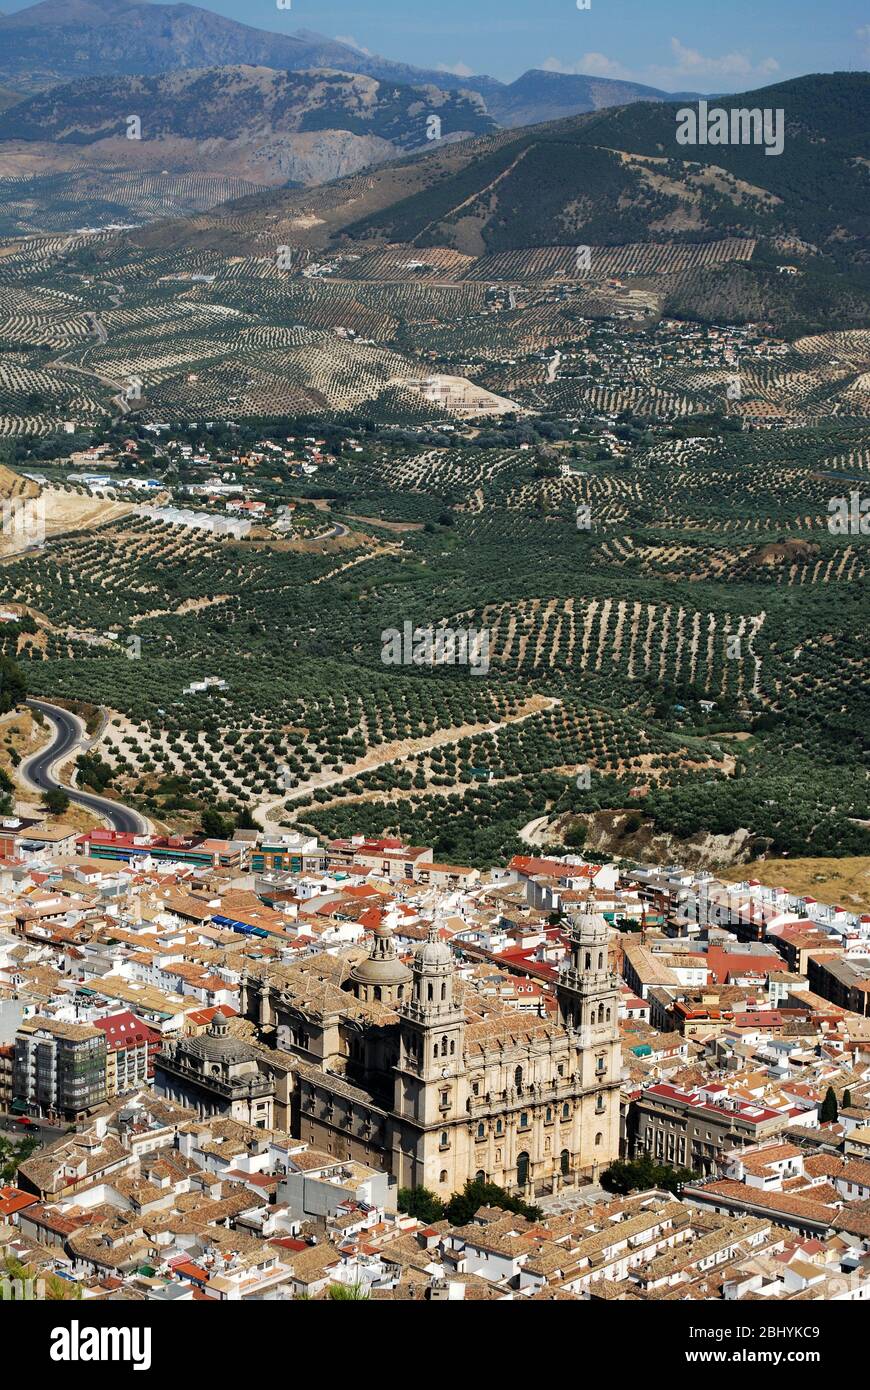 View across the city rooftops with the Cathedral in the centre and olive groves to the rear, Jaen, Jaen Province, Andalucia, Spain, Western Europe Stock Photo